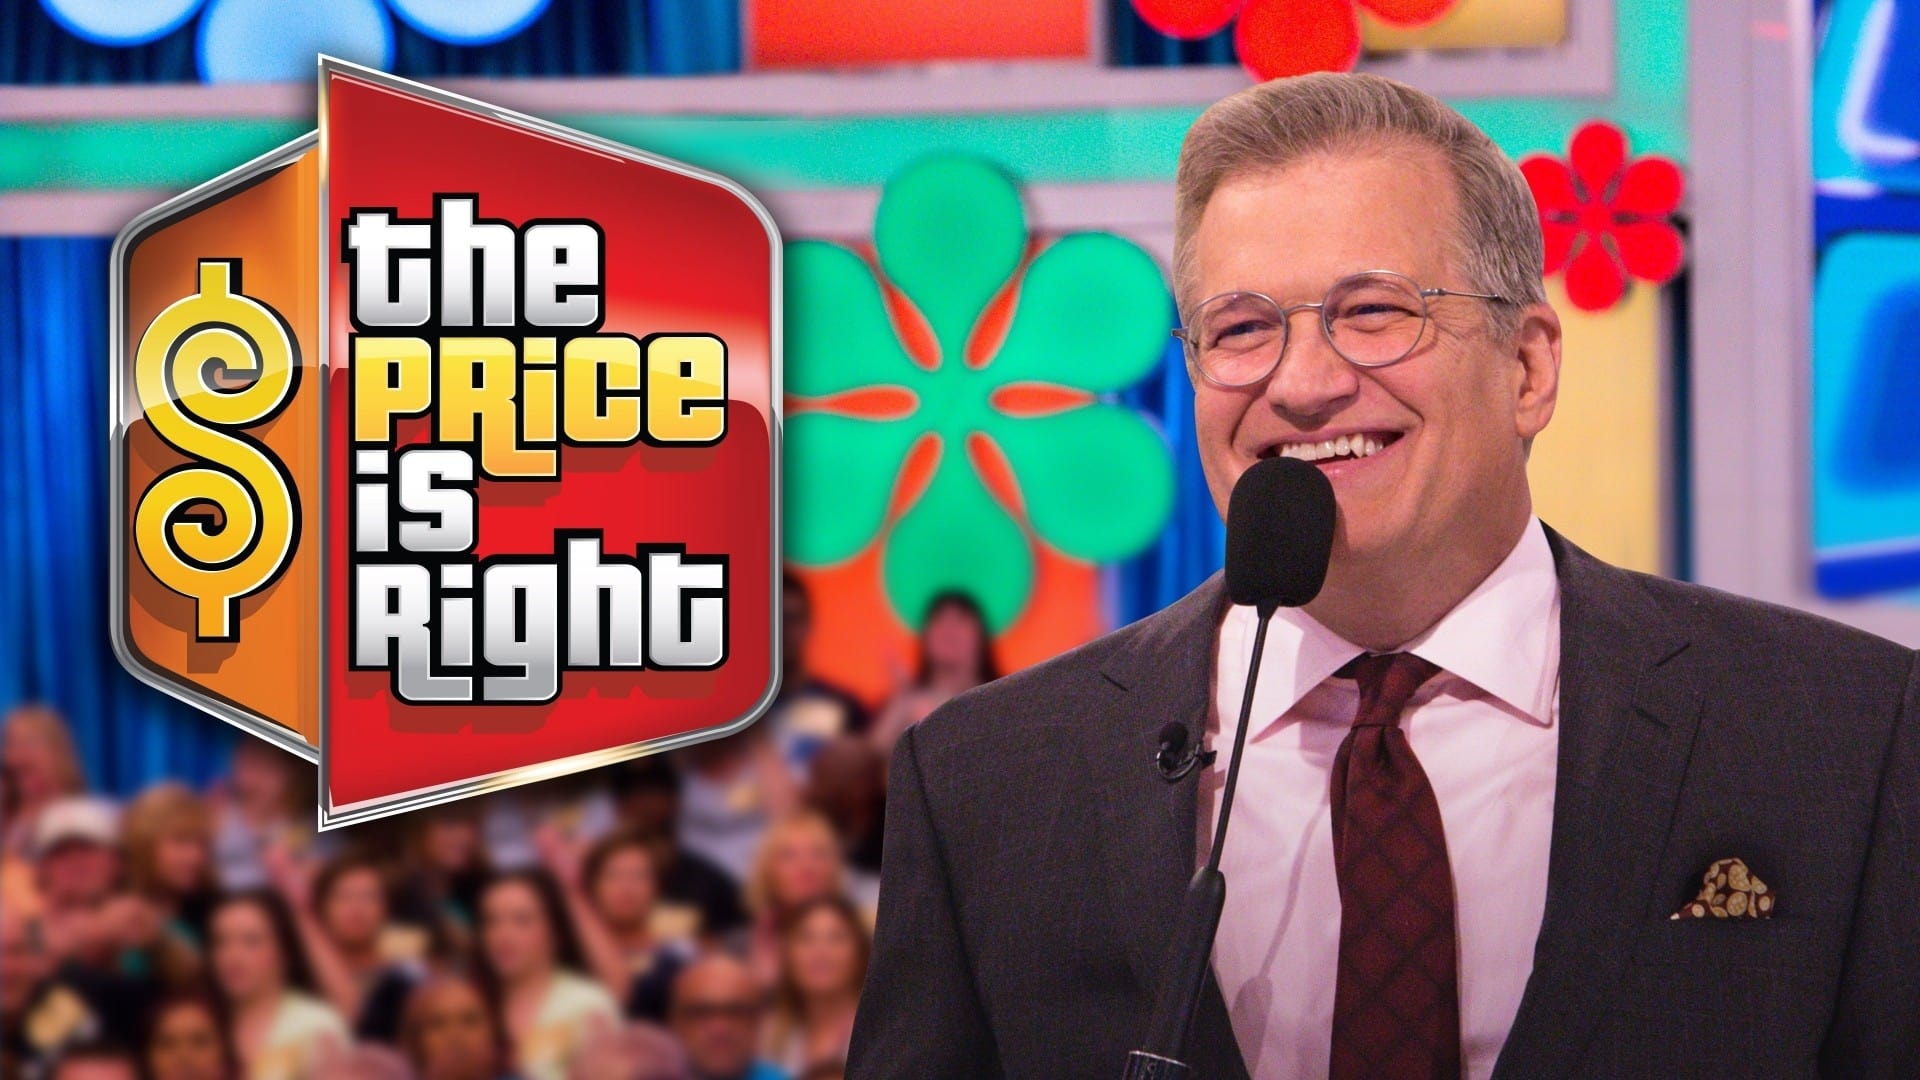 The Price Is Right - Season 1 Episode 79 : The Price Is Right Season 1 Episode 79